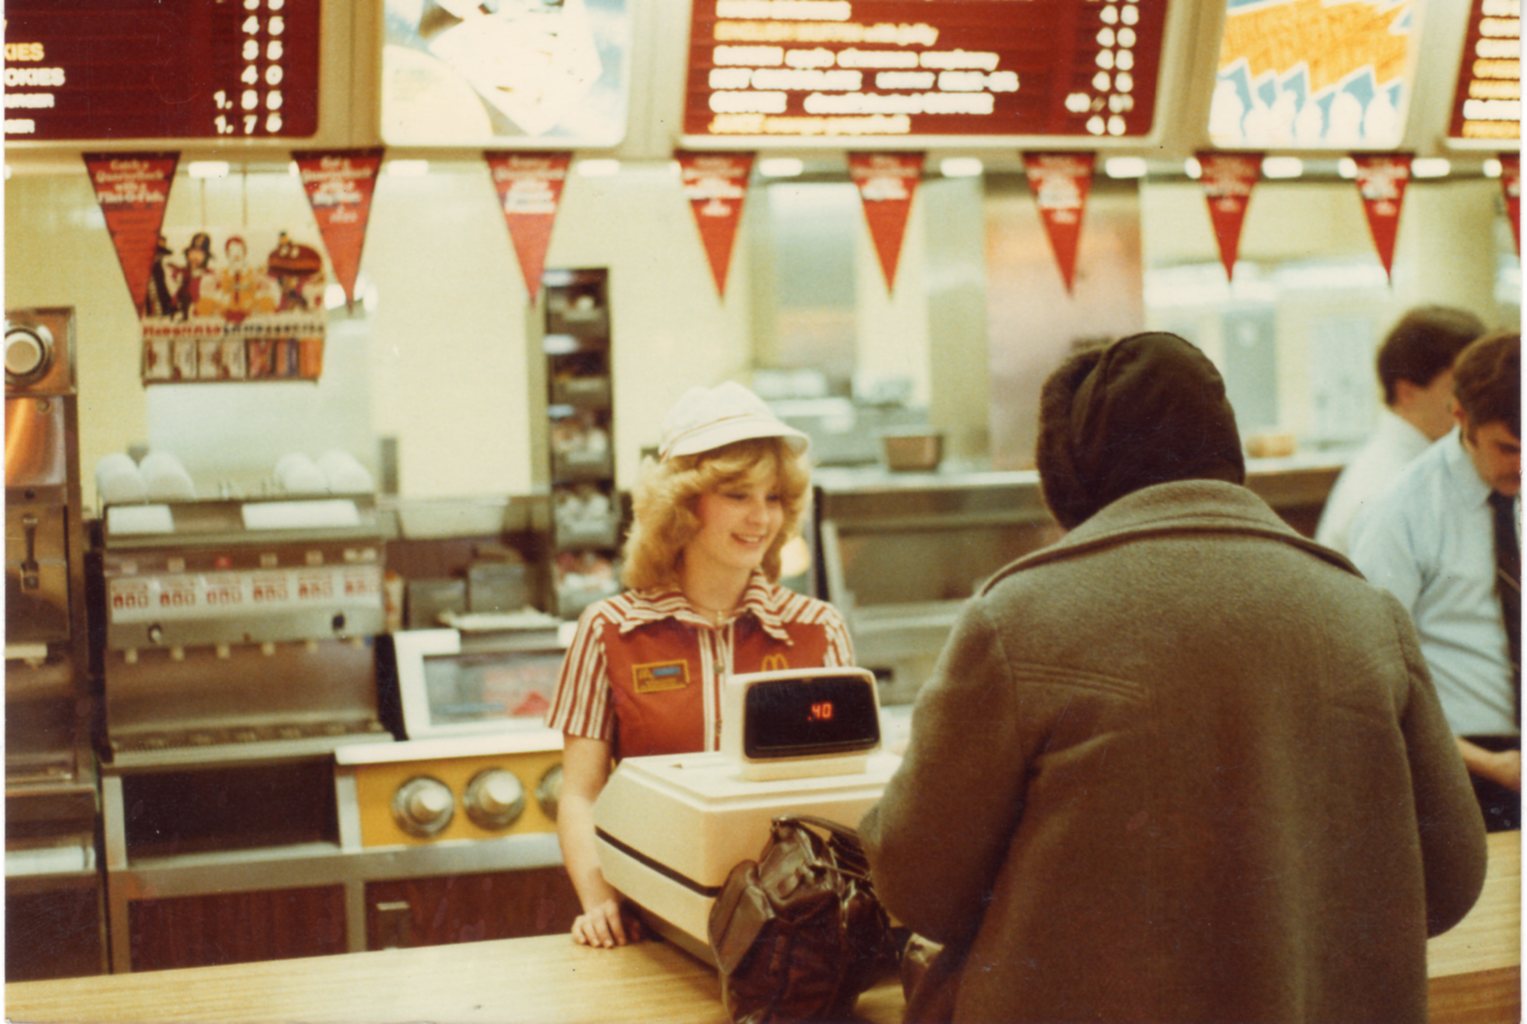 A cashier at a McDonald's is smiling and standing behind the counter and cash register taking a customer's order. 